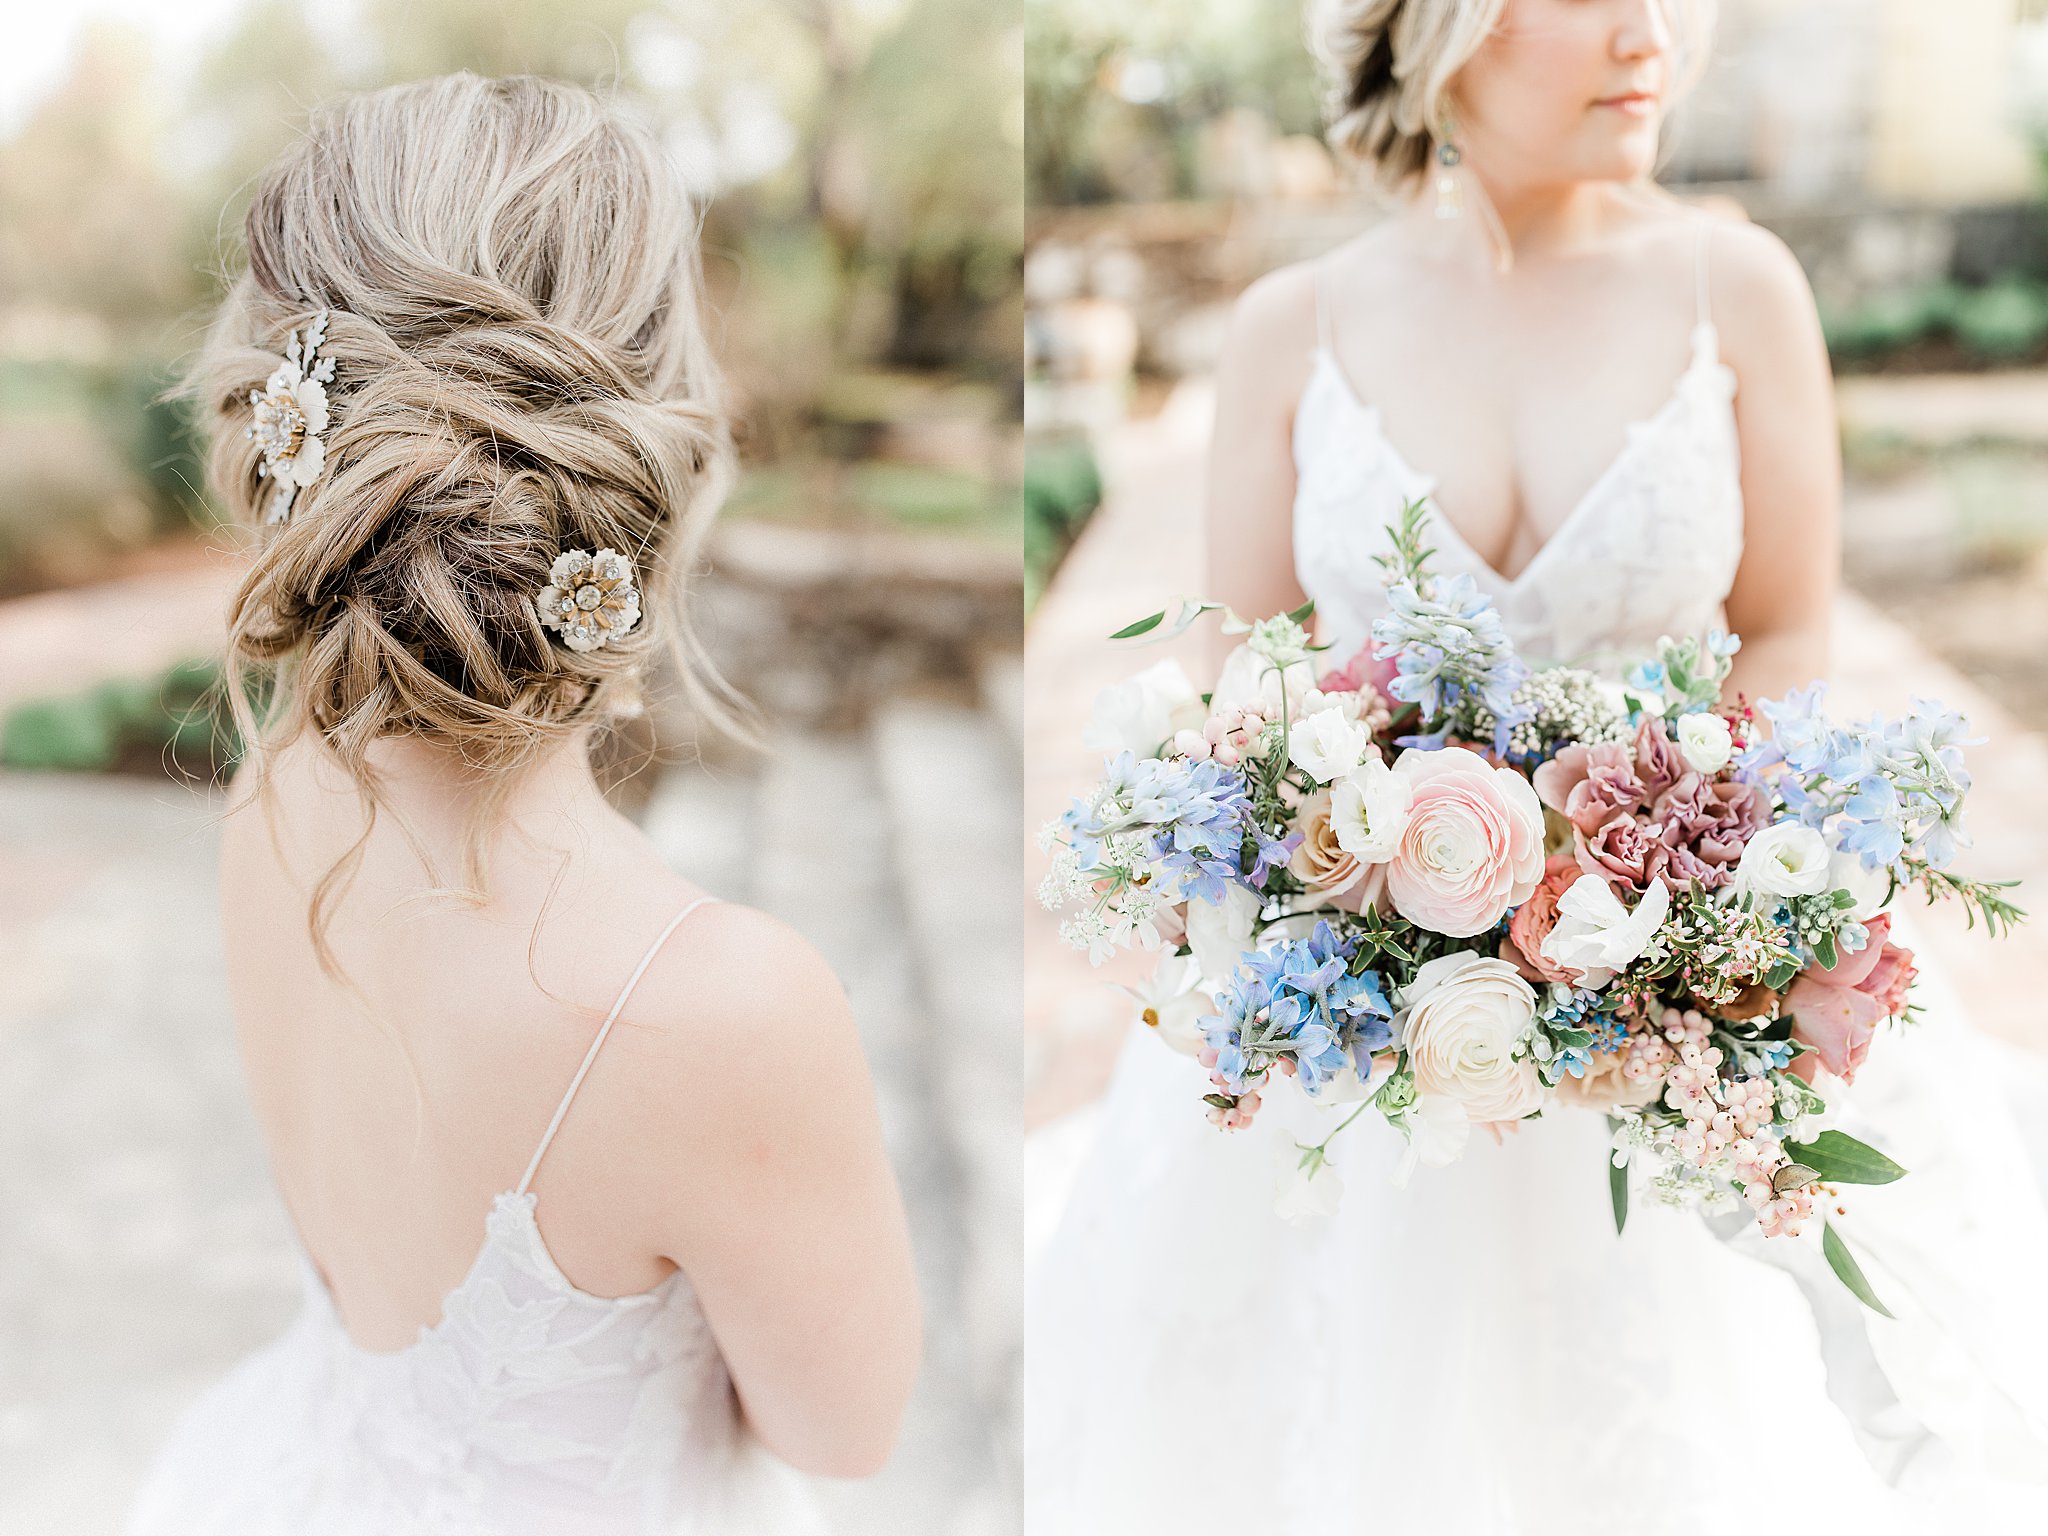 monique lhuillier bridal gown detail, bridal updo hairstyle with flower hair pins and blush, white and blue bouquet